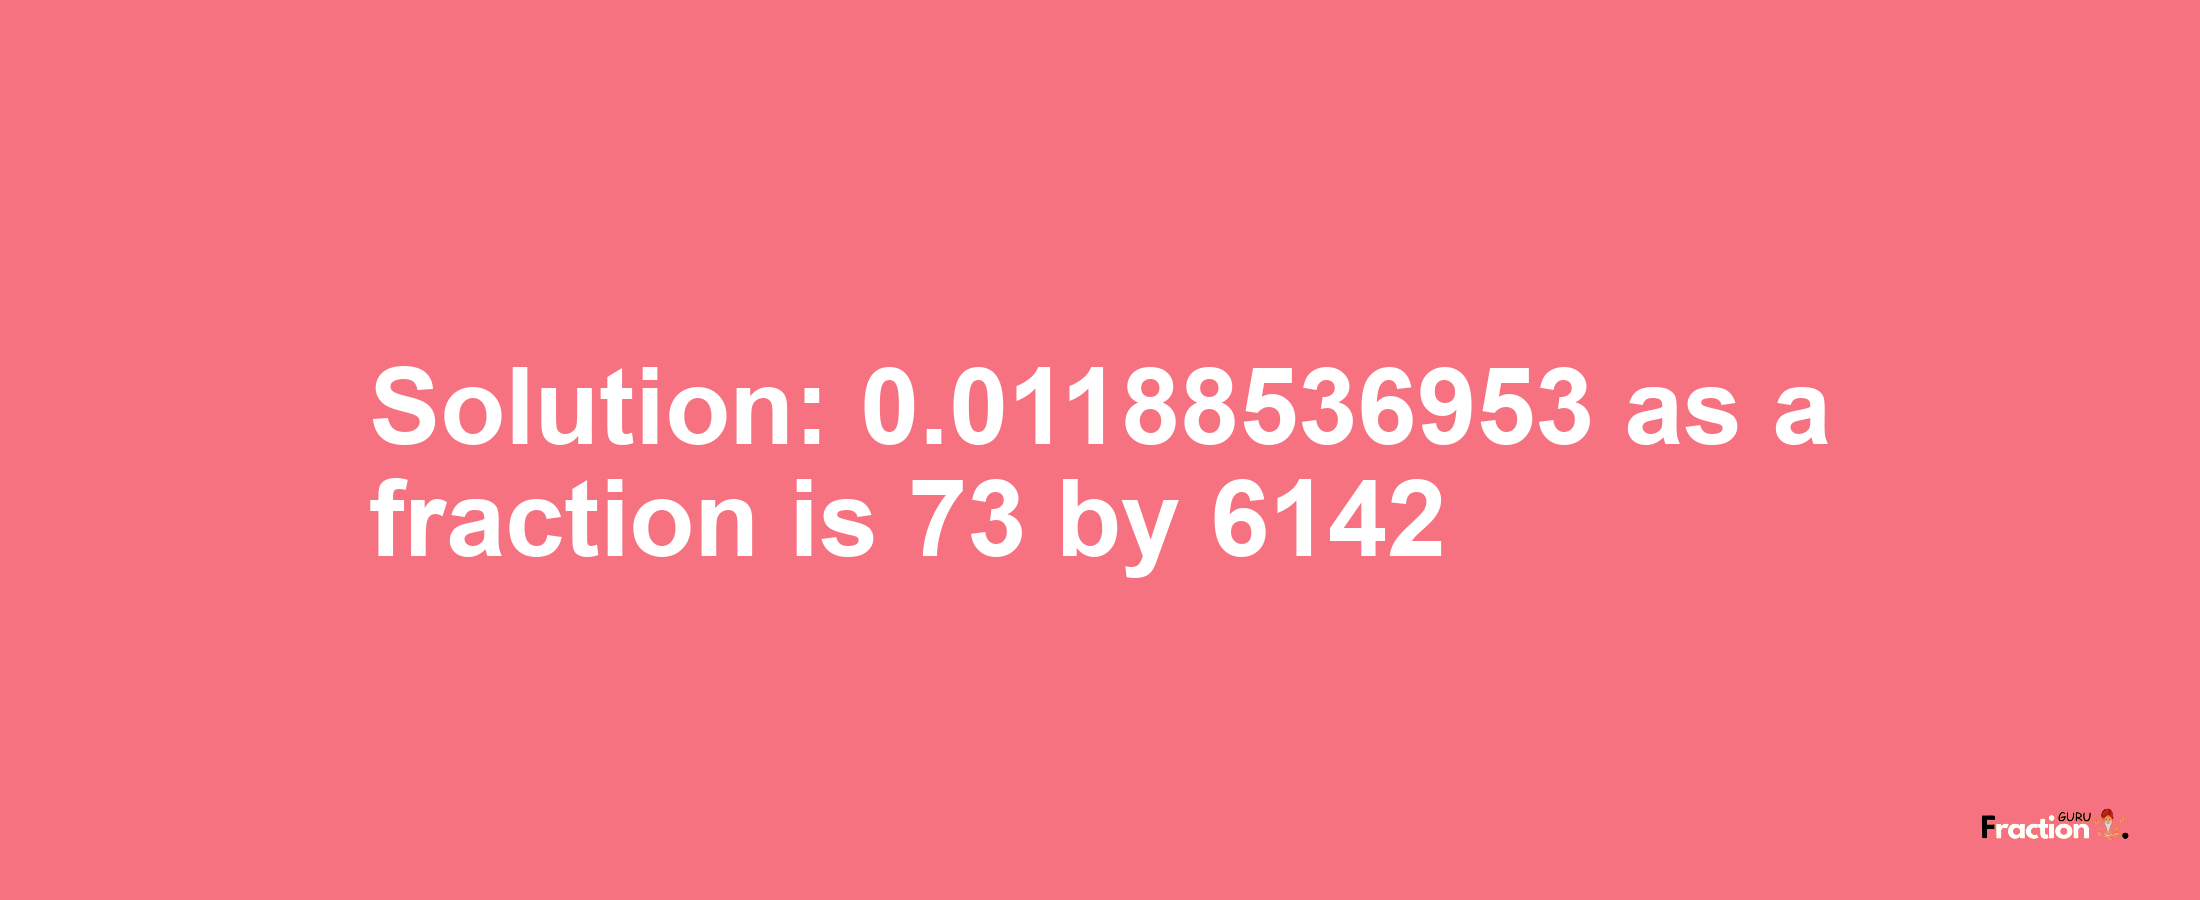 Solution:0.01188536953 as a fraction is 73/6142